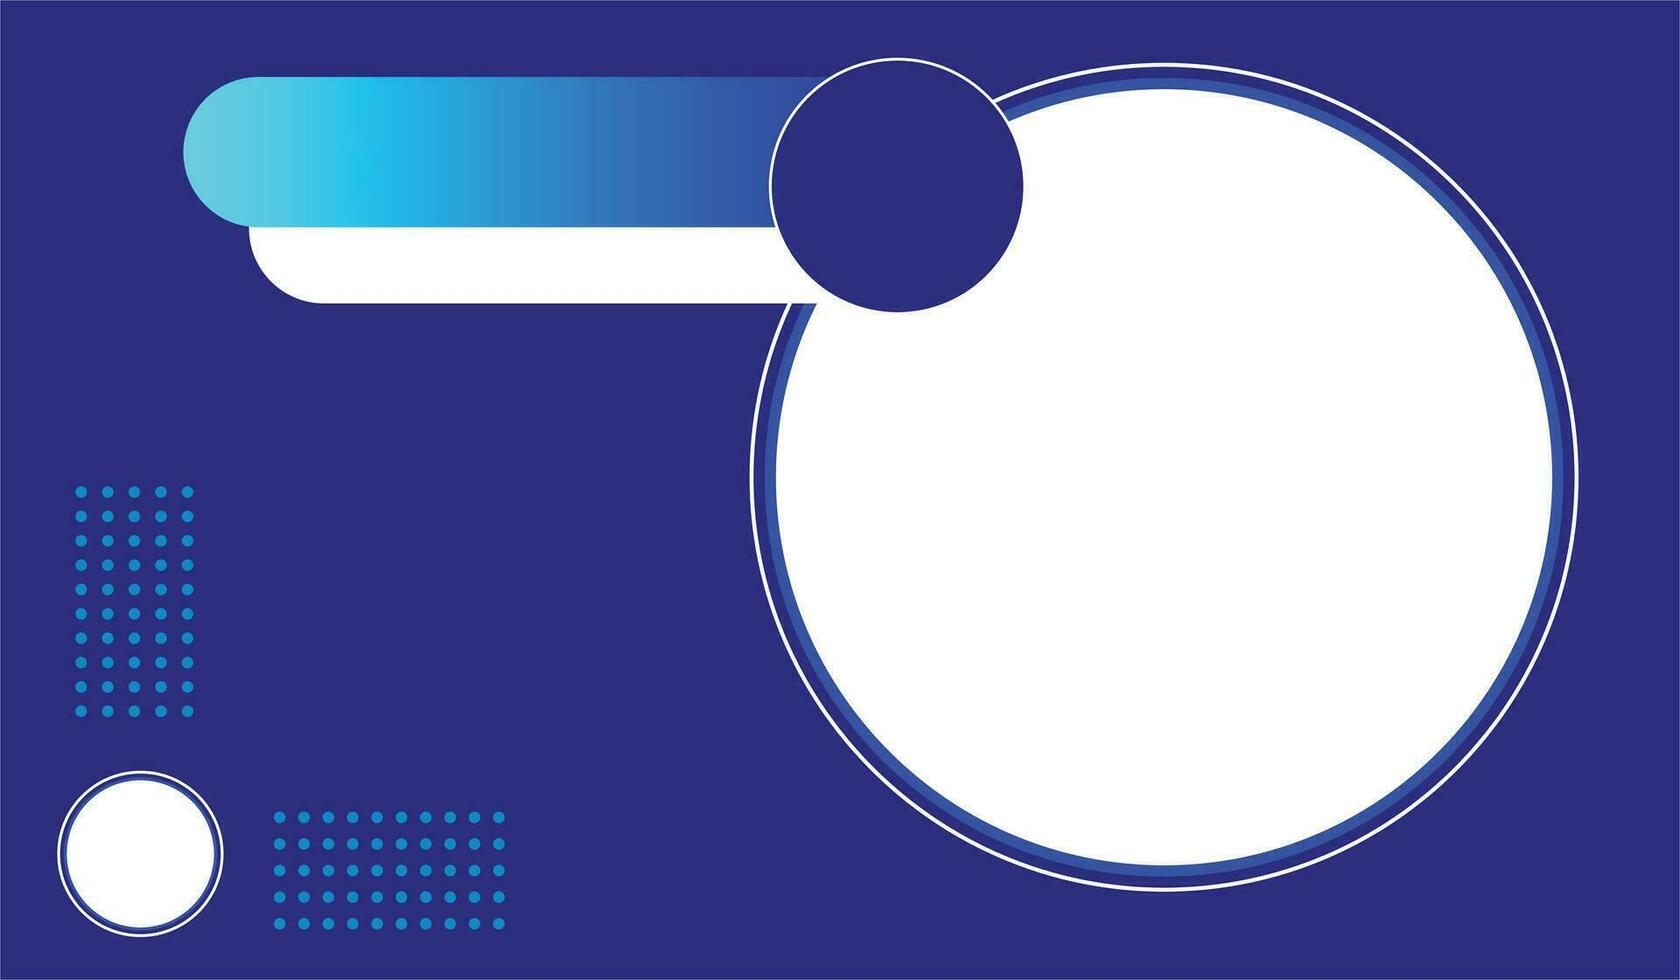 abstract geometric horizontal banner design template with dark blue background. circle shape for space of photo collage. Combination blue gradient element design. vector